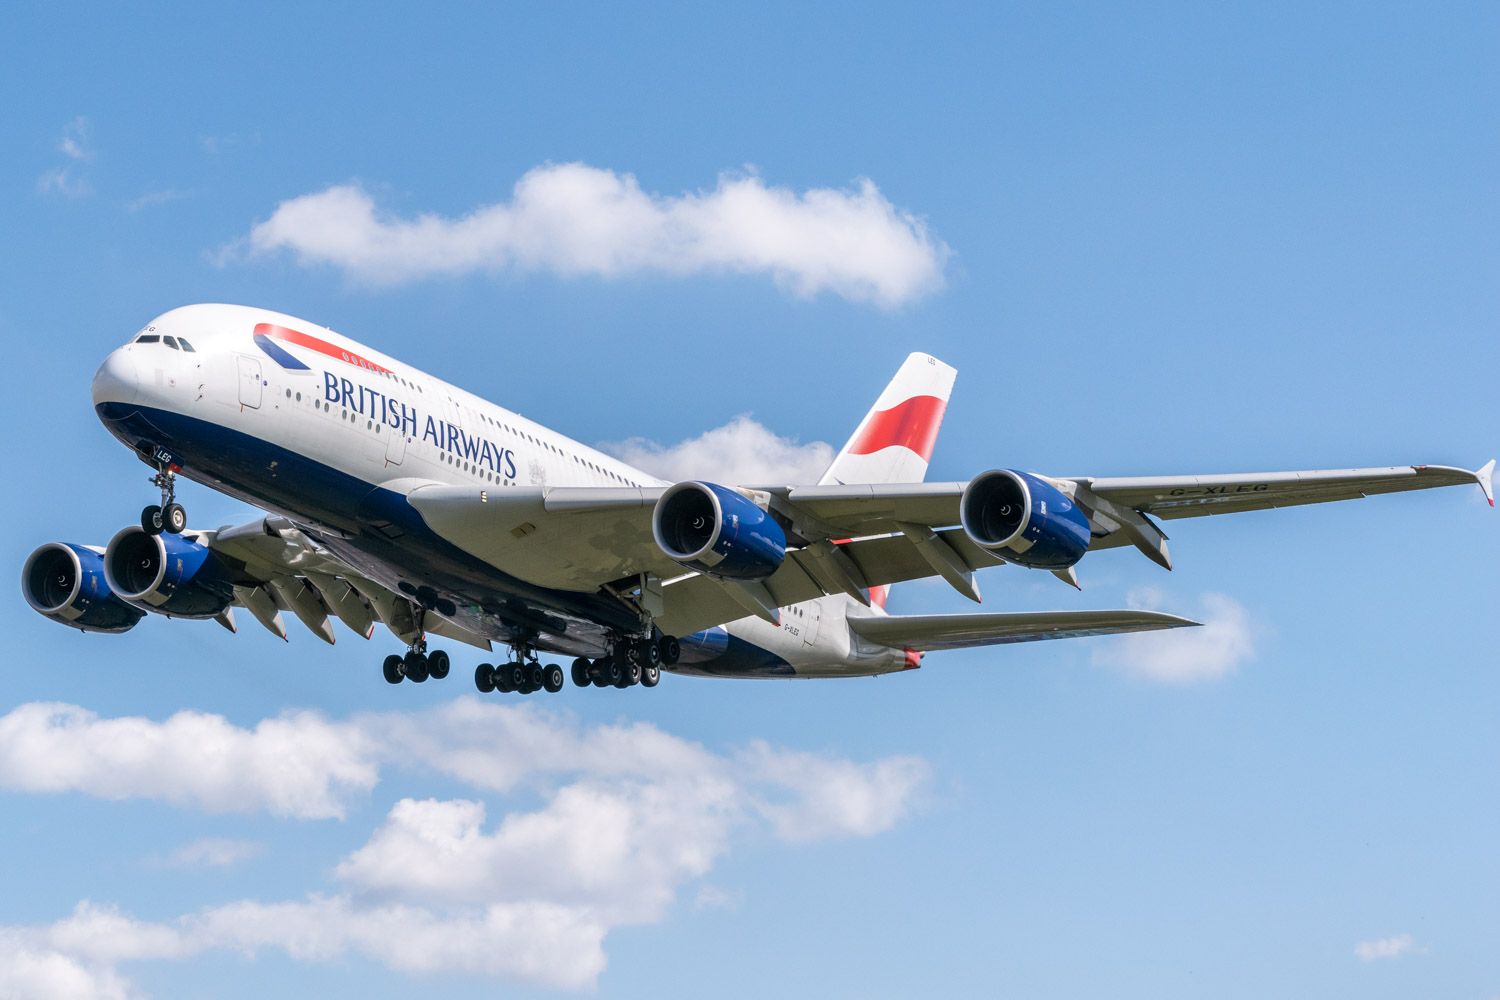 A Boeing 747 aircraft flying for British Airways